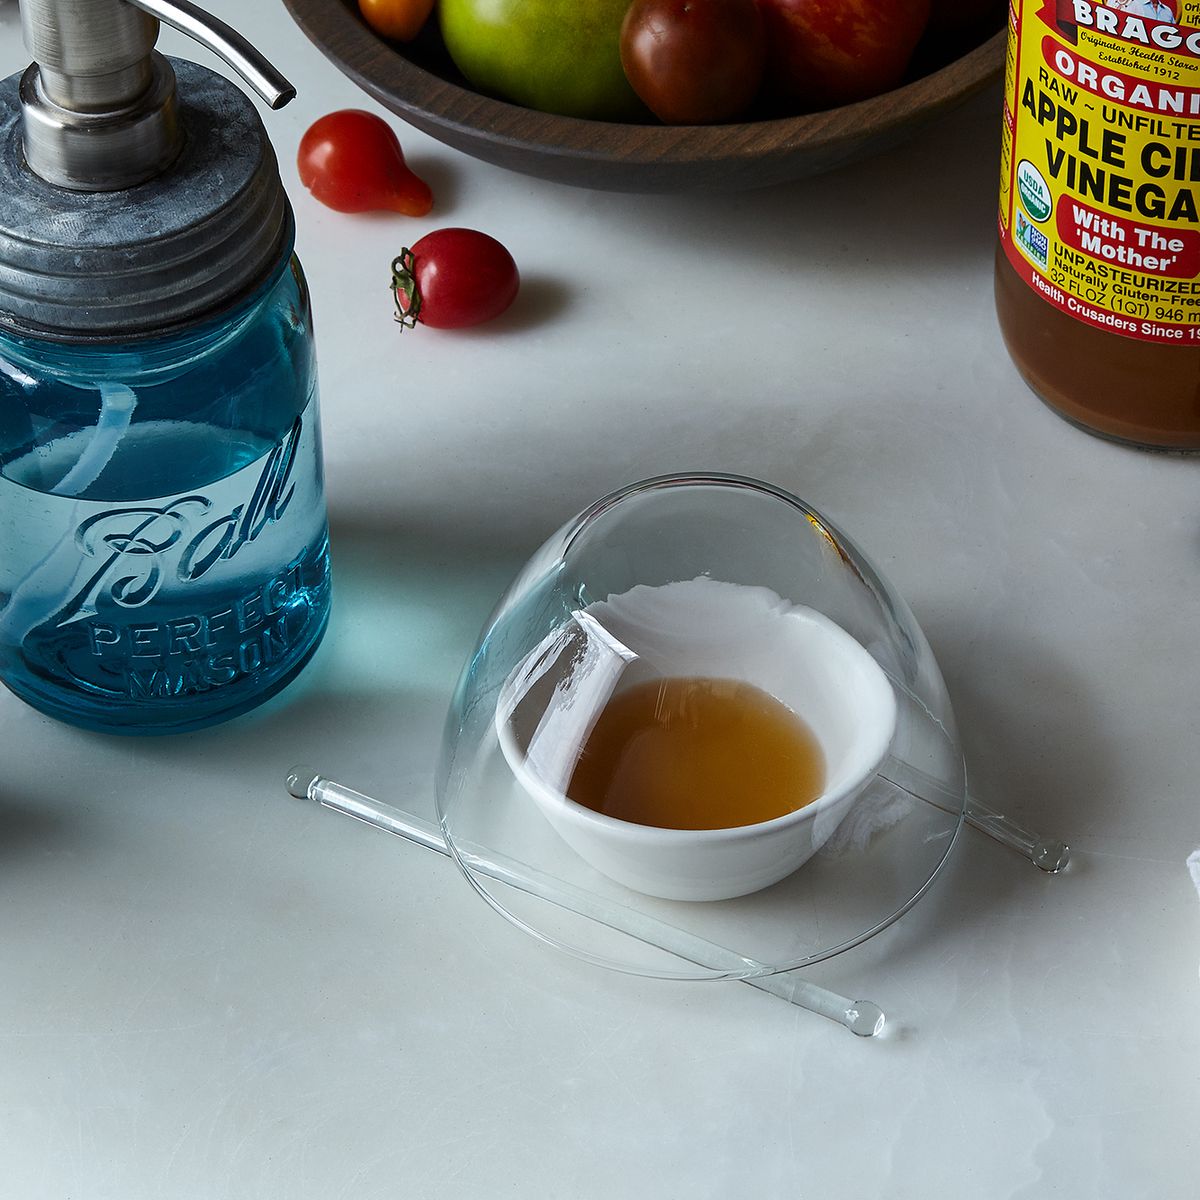 4 Homemade Traps to Get Rid of Fruit Flies